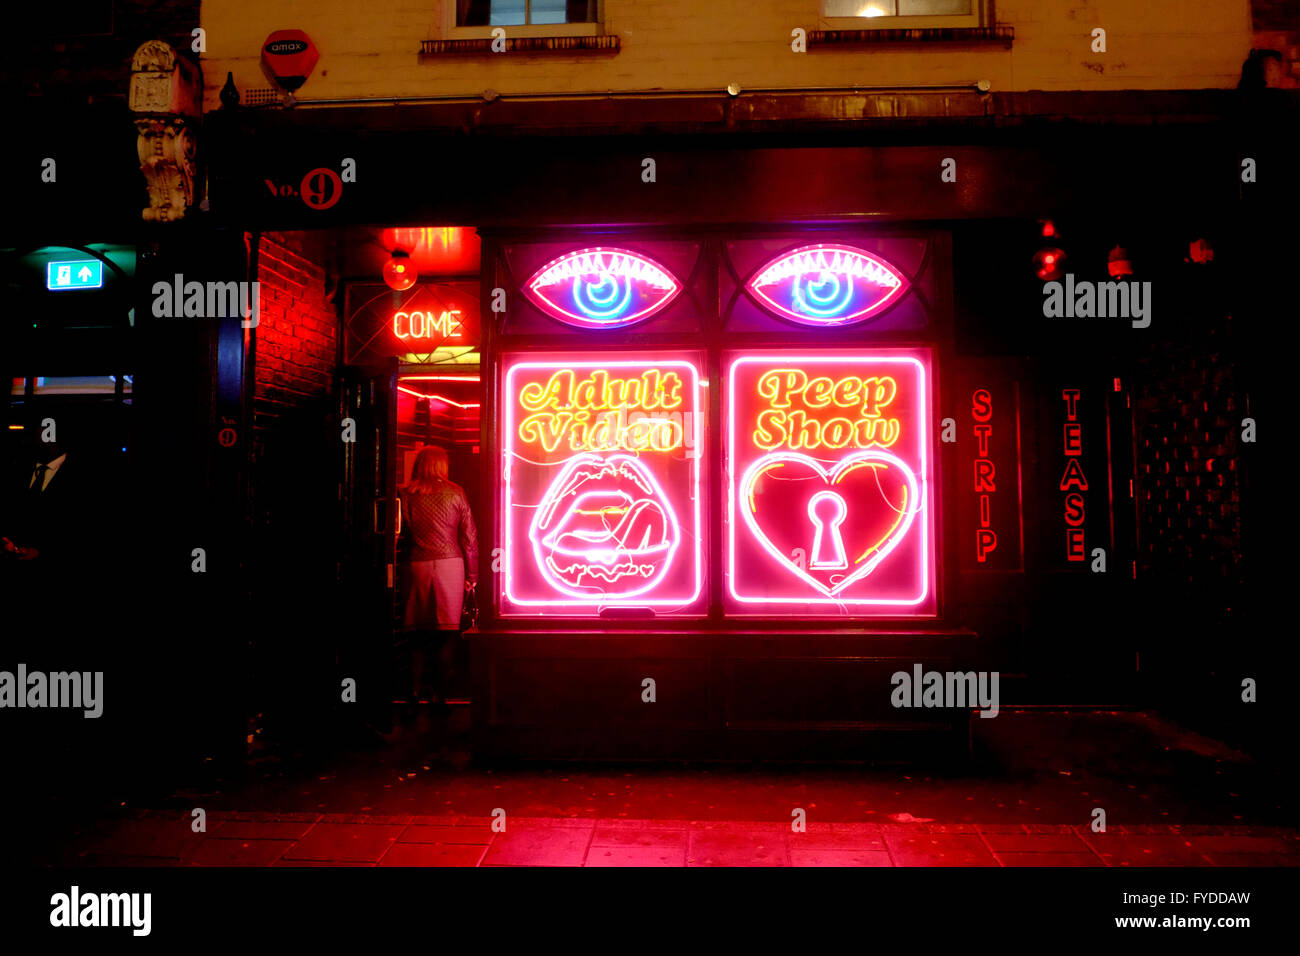 Woman entering Adult Video, Peep Show, Strip Tease, Sex store in Soho, London Stock Photo image